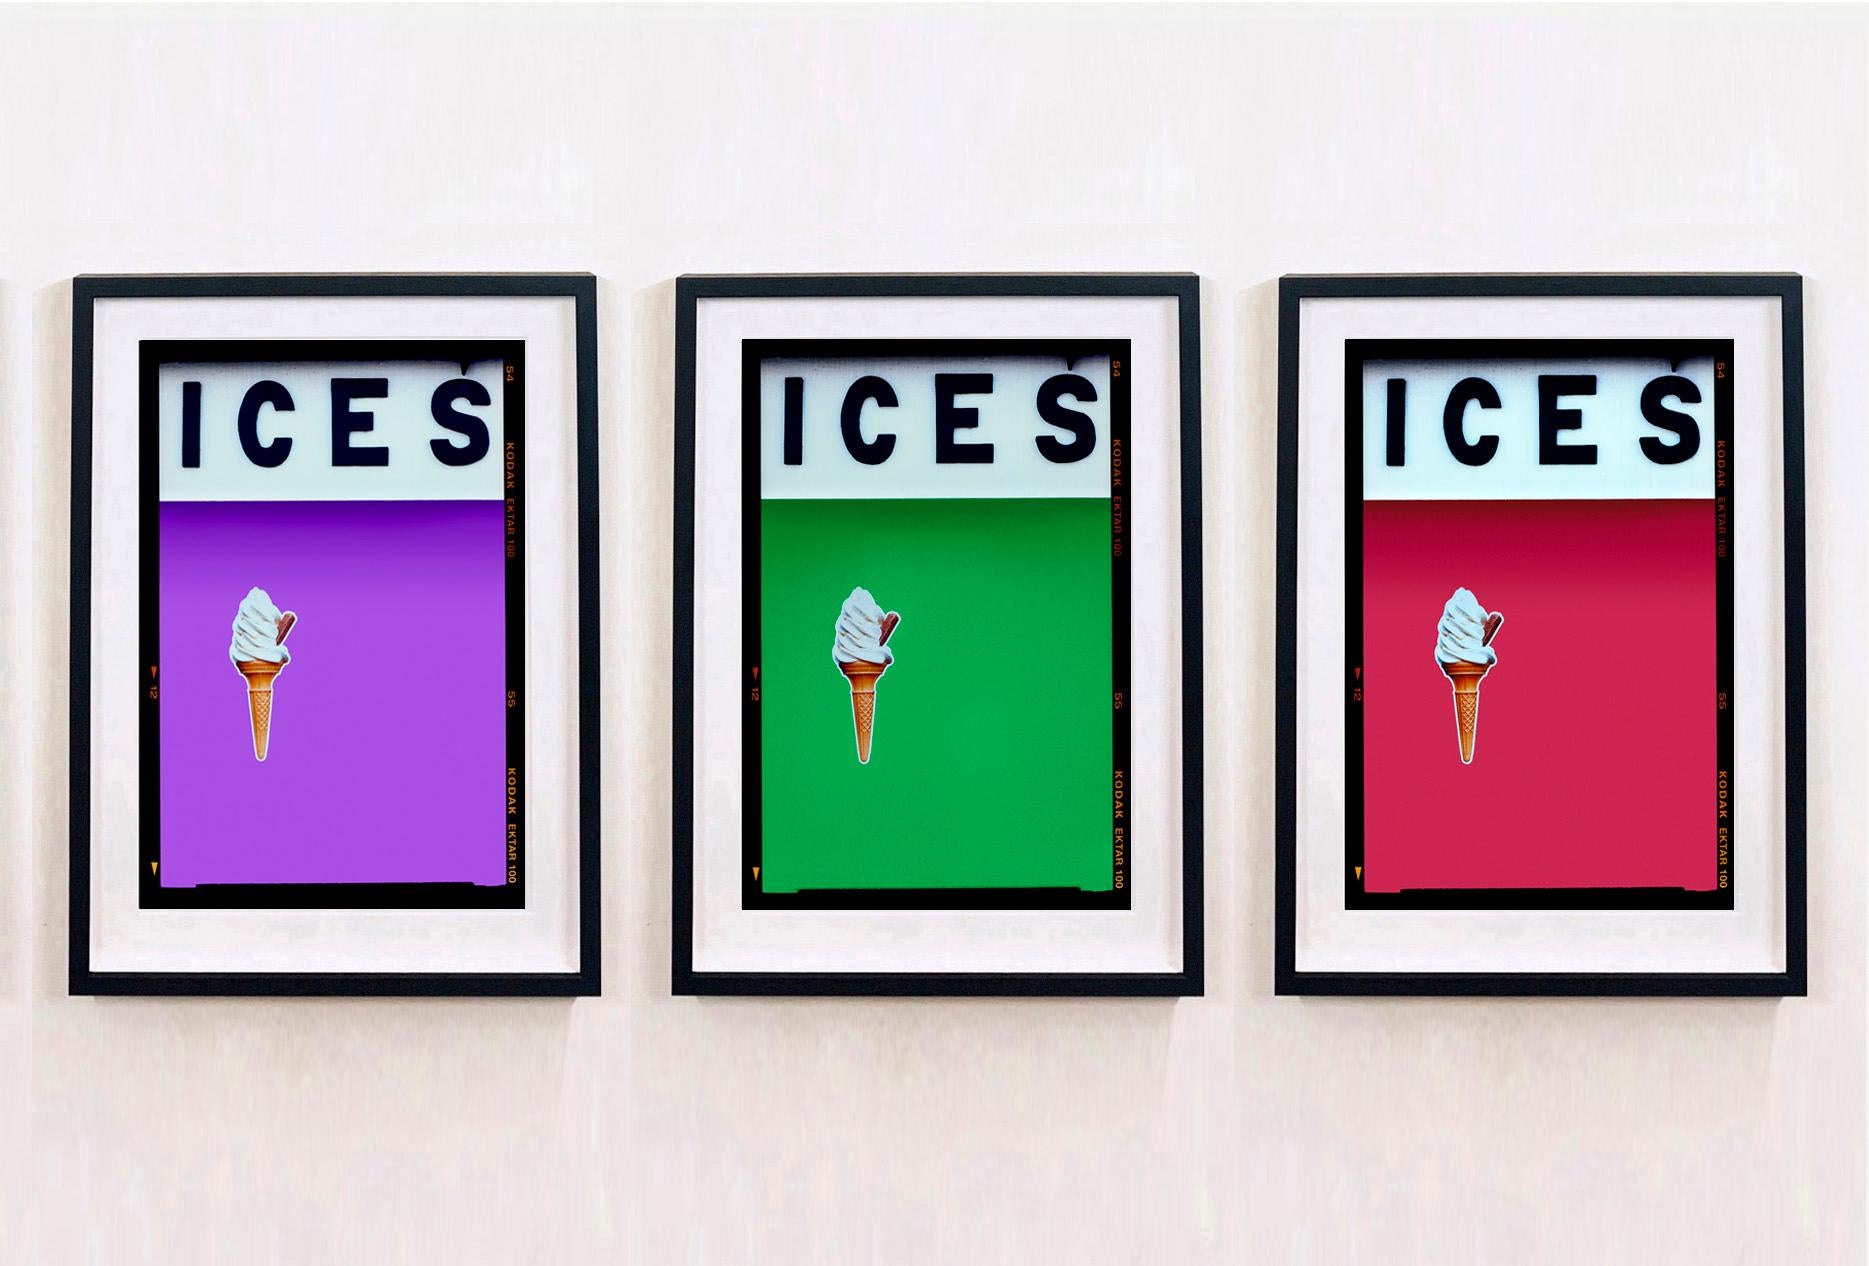 ICES - Three Framed Artworks, Photographs by Richard Heeps. Select your color pairing.

ICES, by Richard Heeps, photographed at the British Seaside at the end of summer 2020. This artwork is about evoking memories of the simple joy of days by the